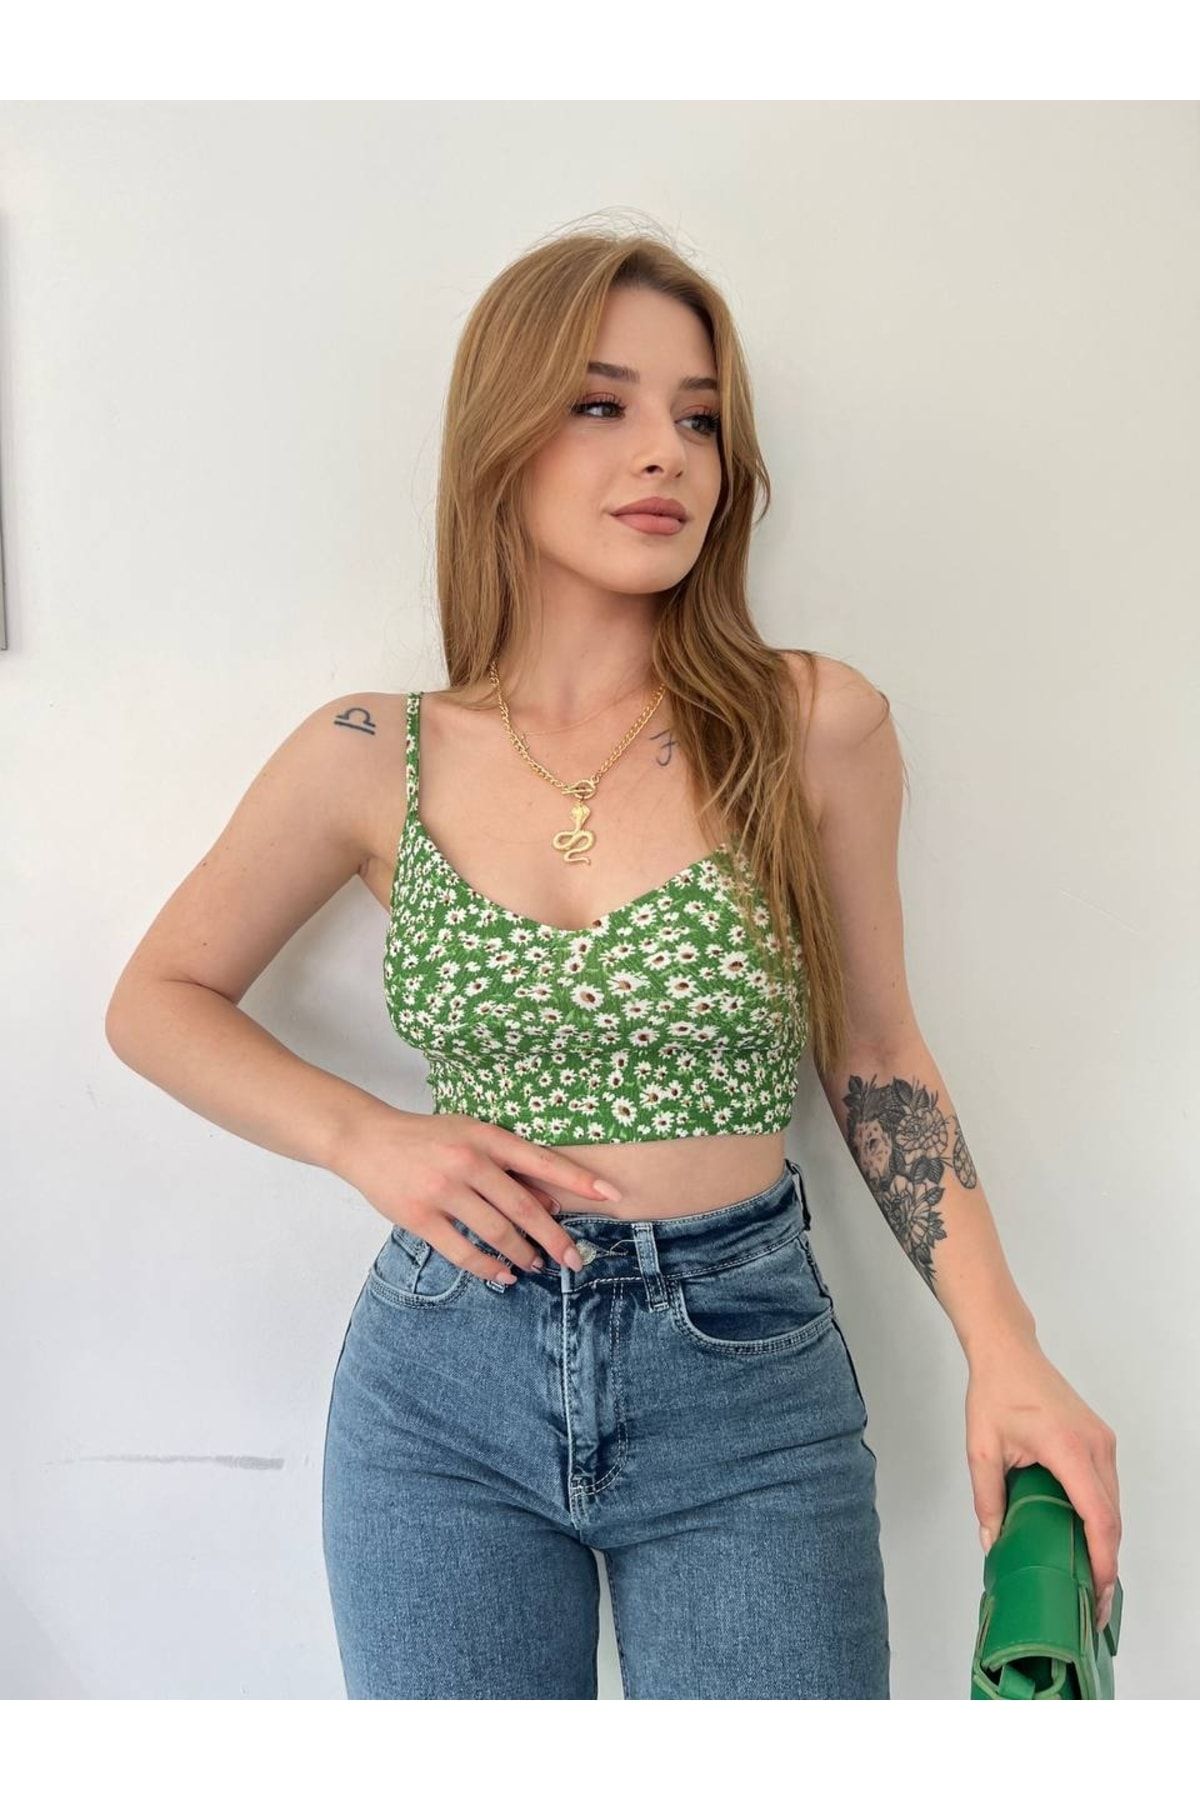 Fav Style Women's Strappy Floral Patterned Crop Top Blouse Green